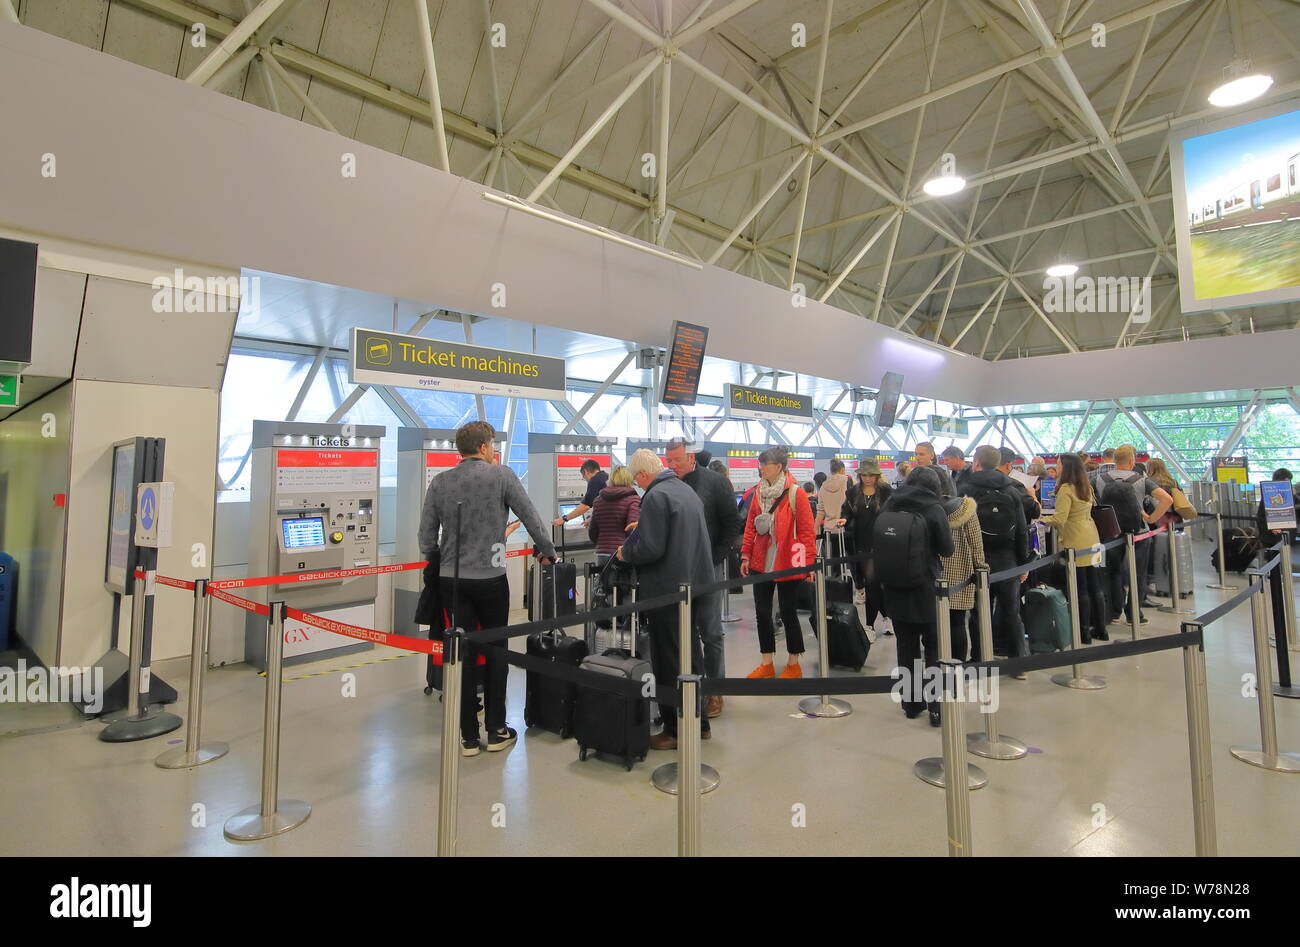 People queue to buy Gatwick Express train ticket at Gatwick airport London  England Stock Photo - Alamy